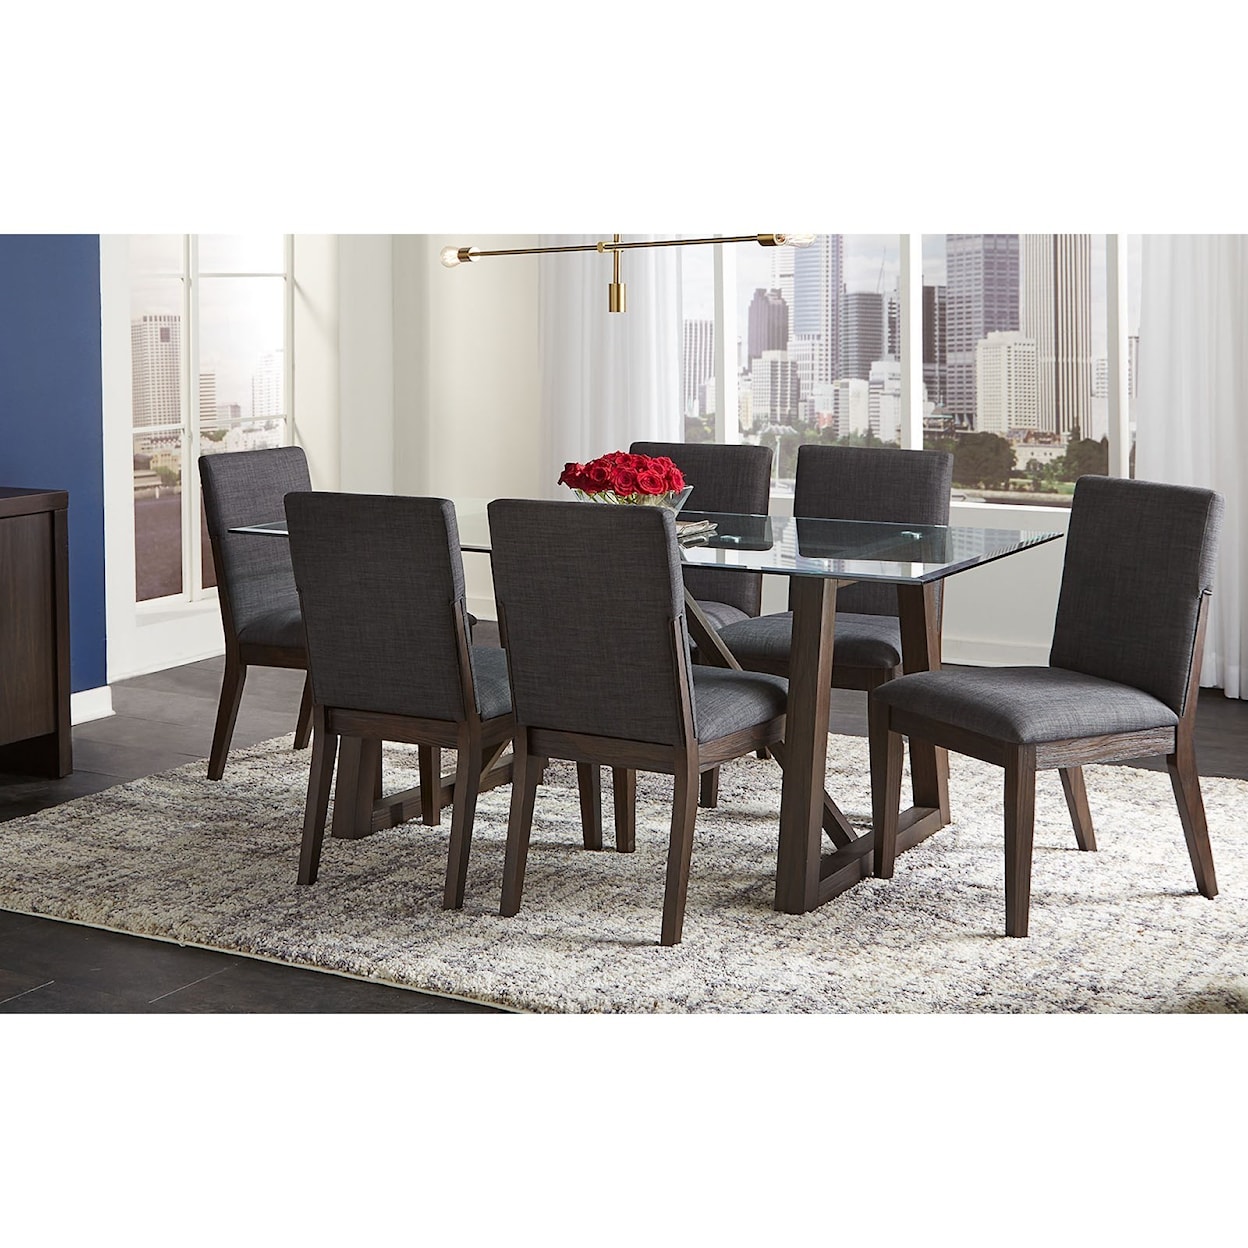 AAmerica Palm Canyon Dining Table